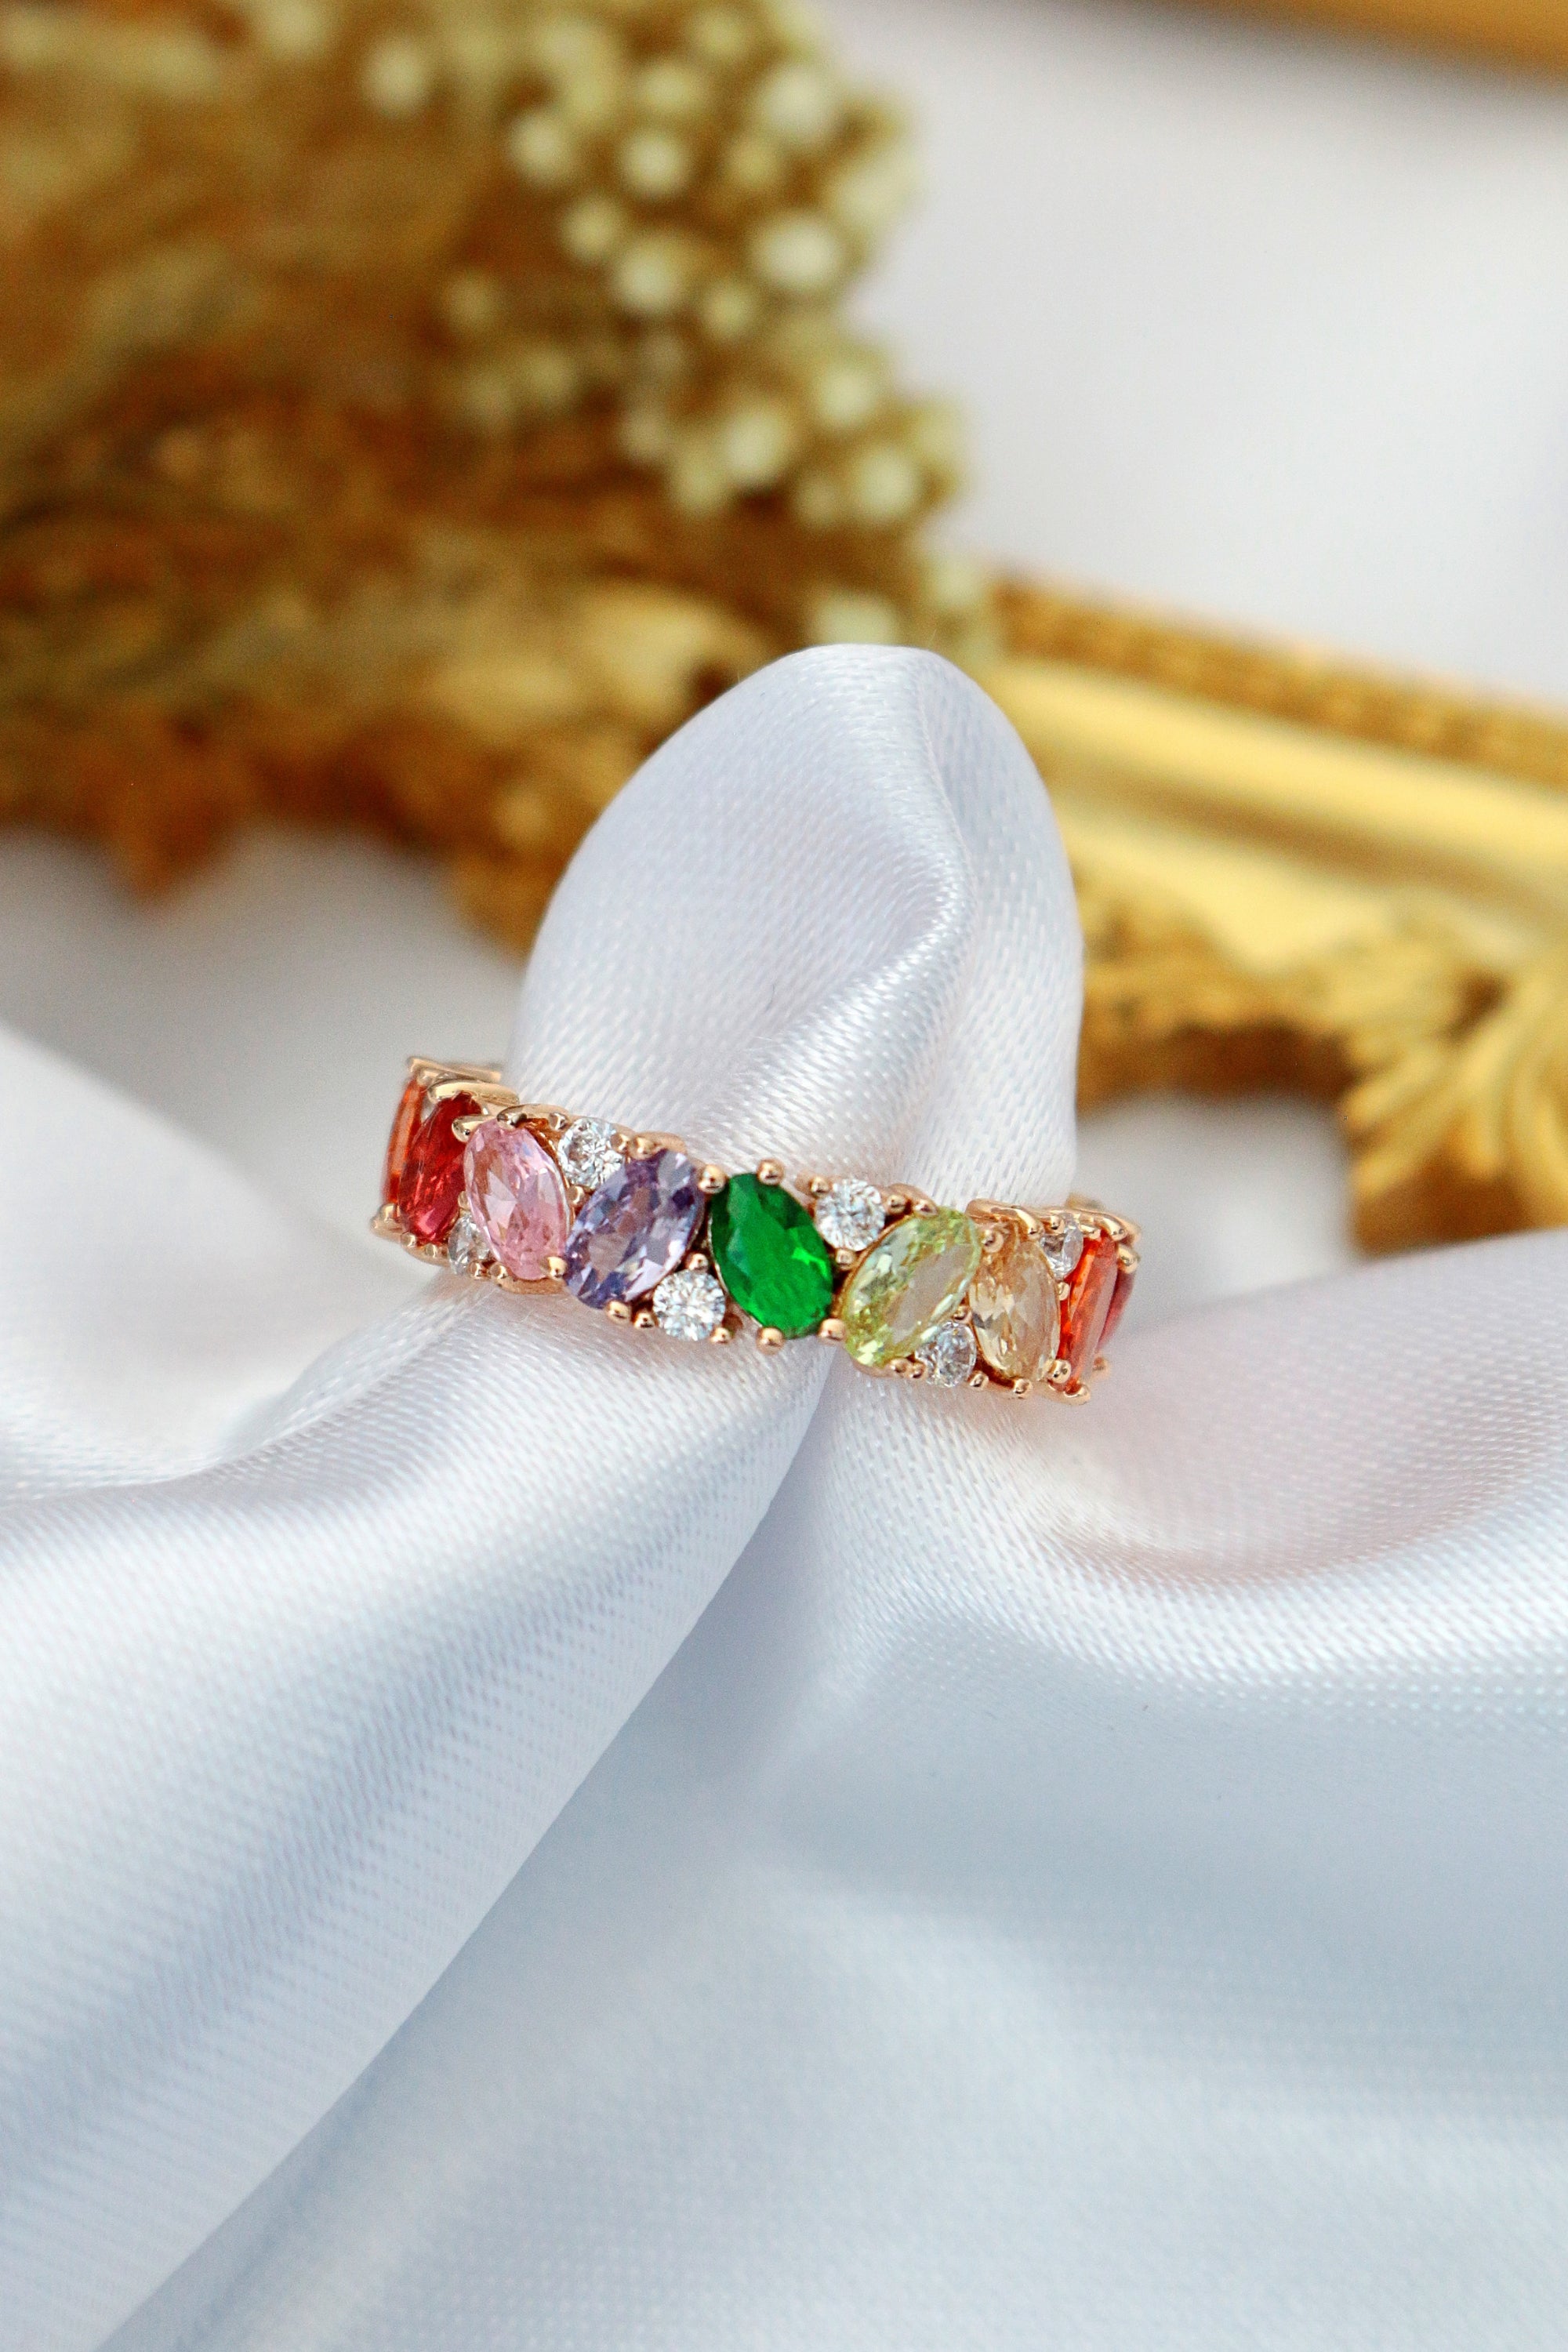 18K Rainbow Swarovski Eternity Band Ring - Handmade in Europe with High-Quality CZ Gems in Multicolor Hues Bijou Her